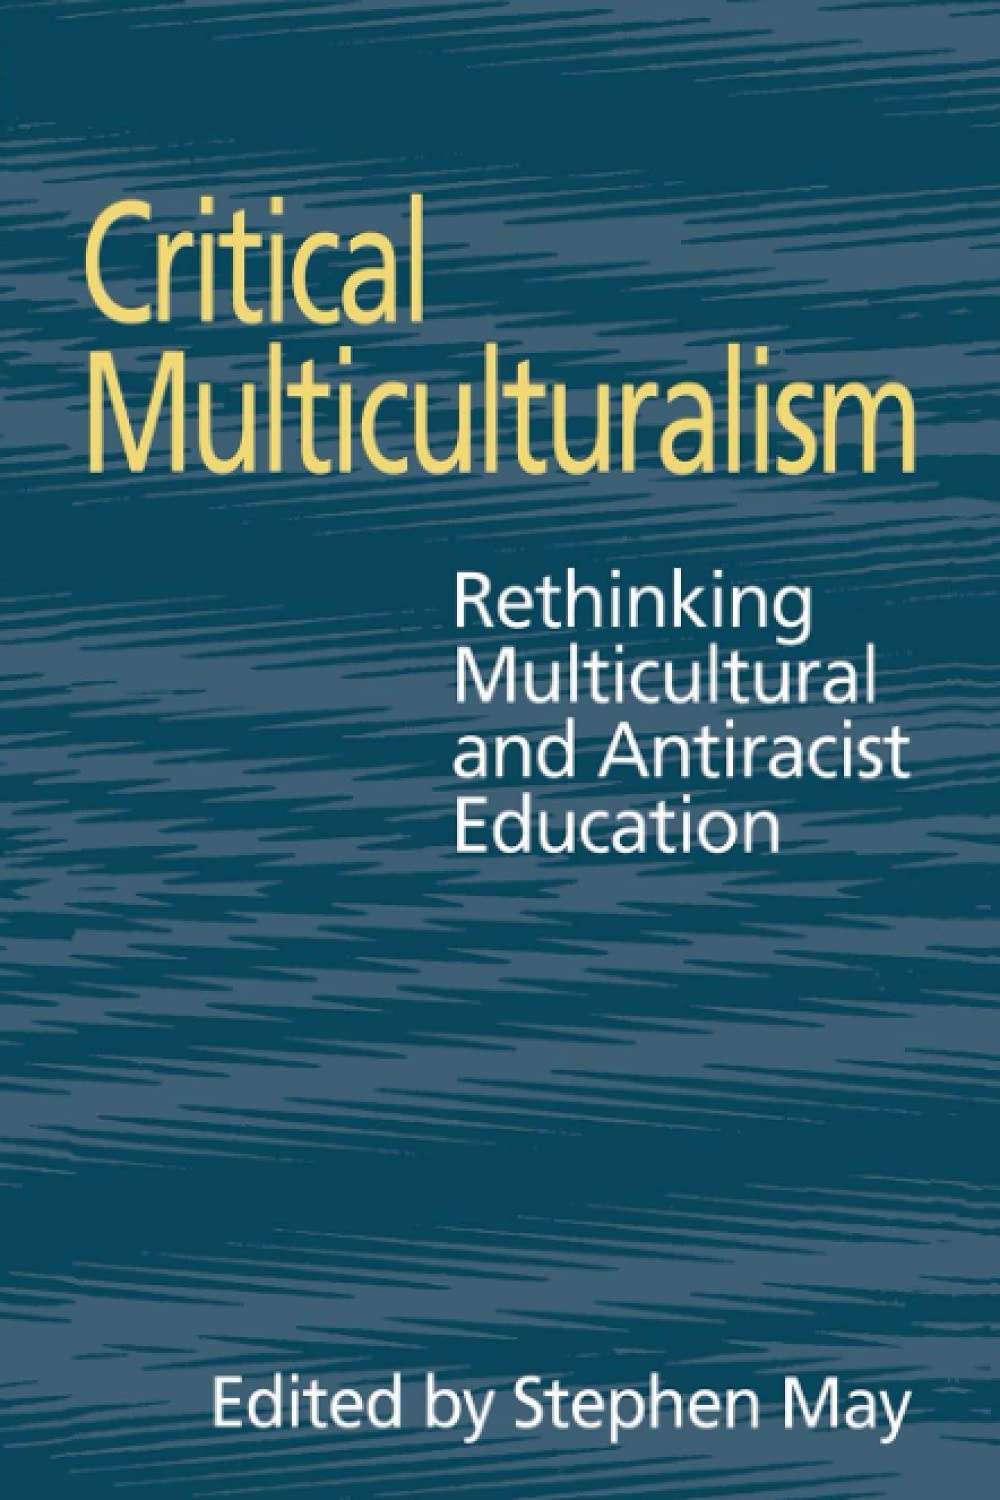 Critical Multiculturalism: Rethinking Multicultural and Antiracist Education (Social Research & Educational Studies S) [Paperback] May, Stephen